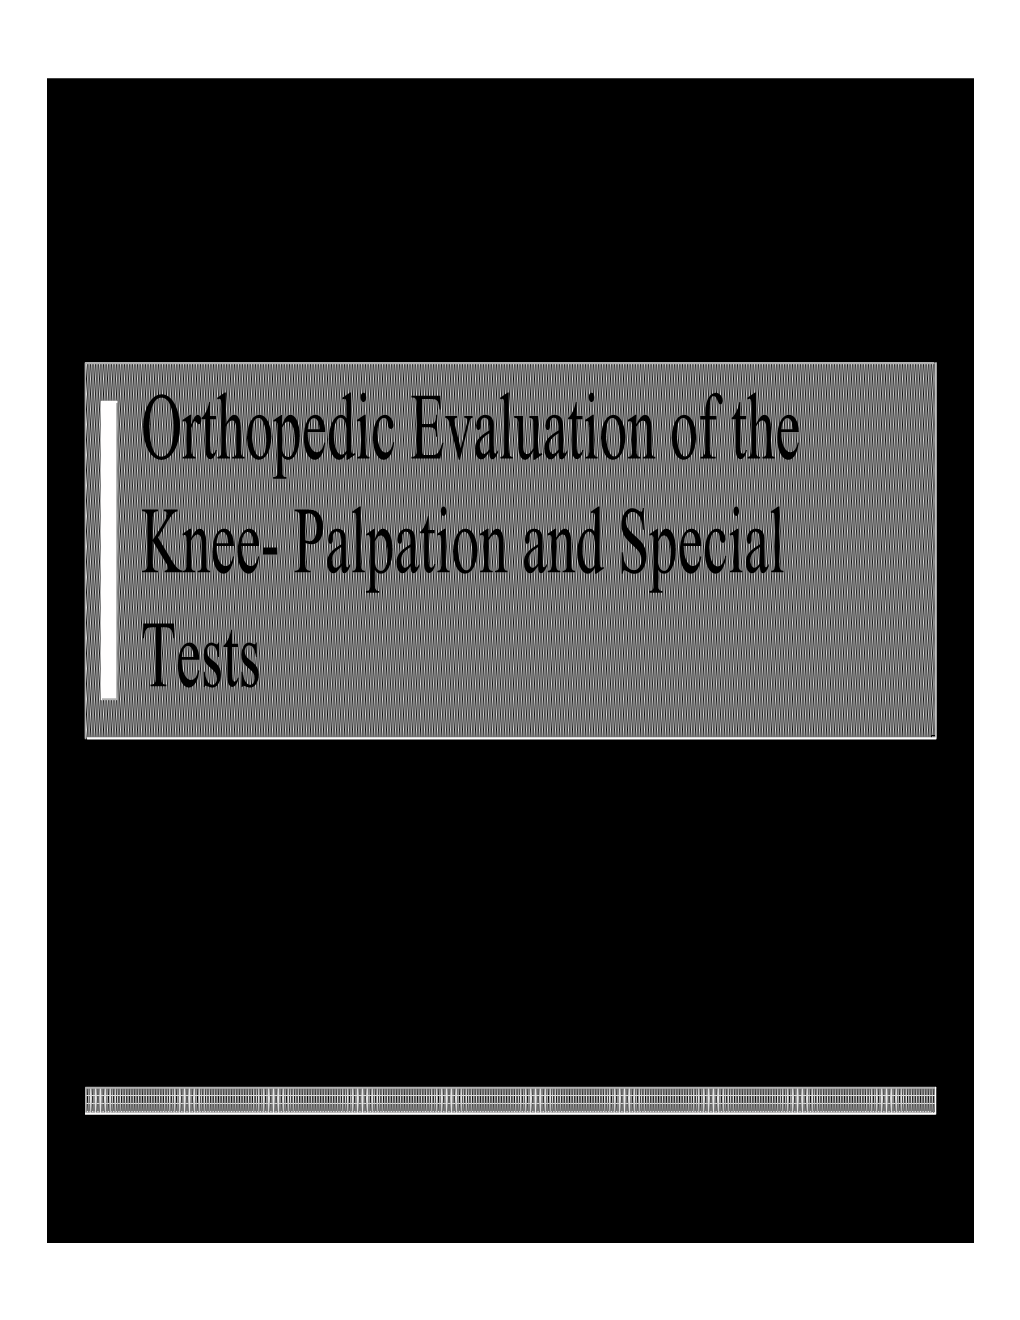 Orthopedic Evaluation of the Knee- Palpation and Special Tests